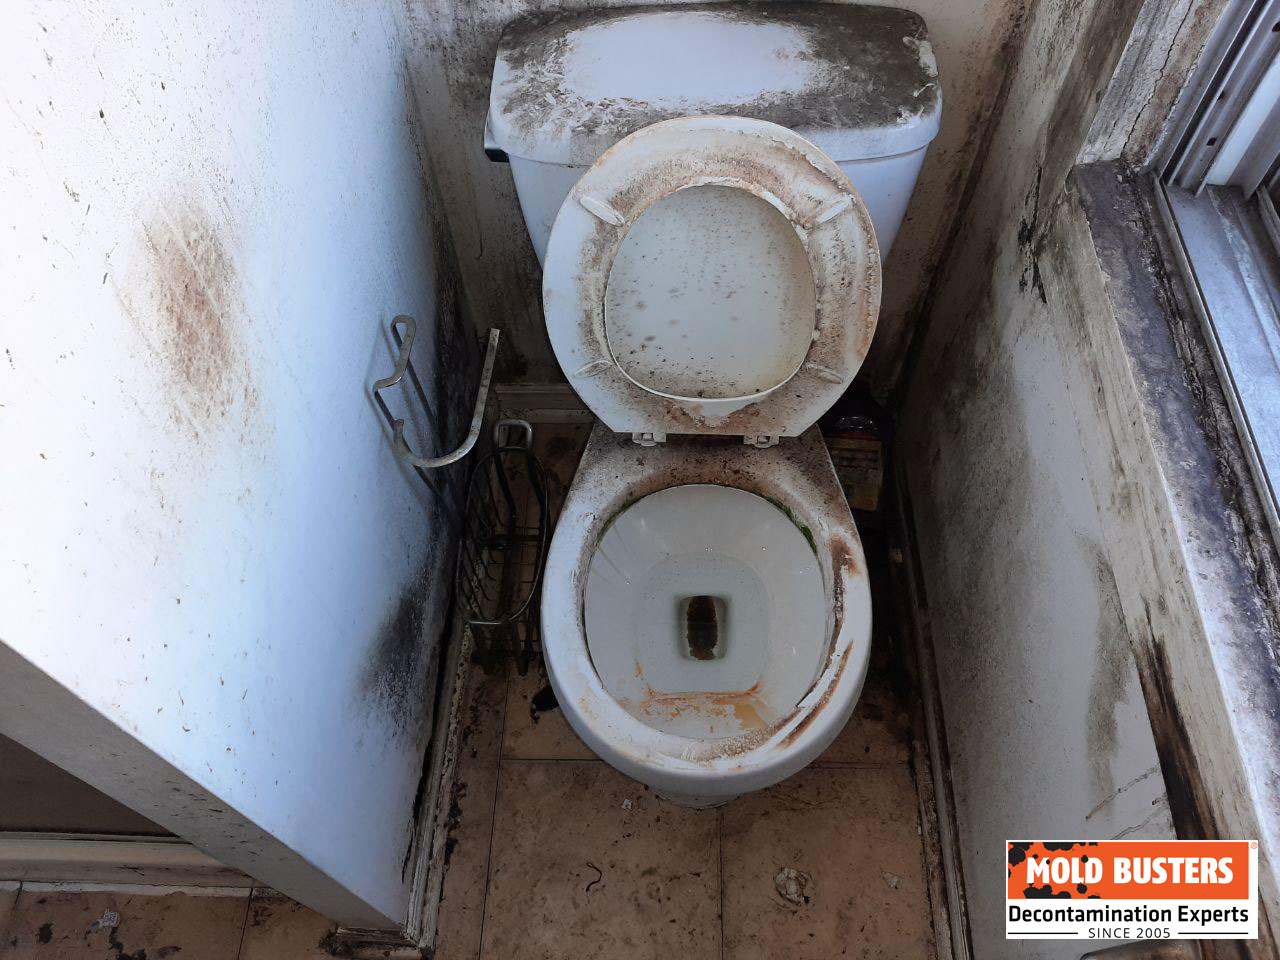 What Causes Black Streaks In Your Toilet Bowl